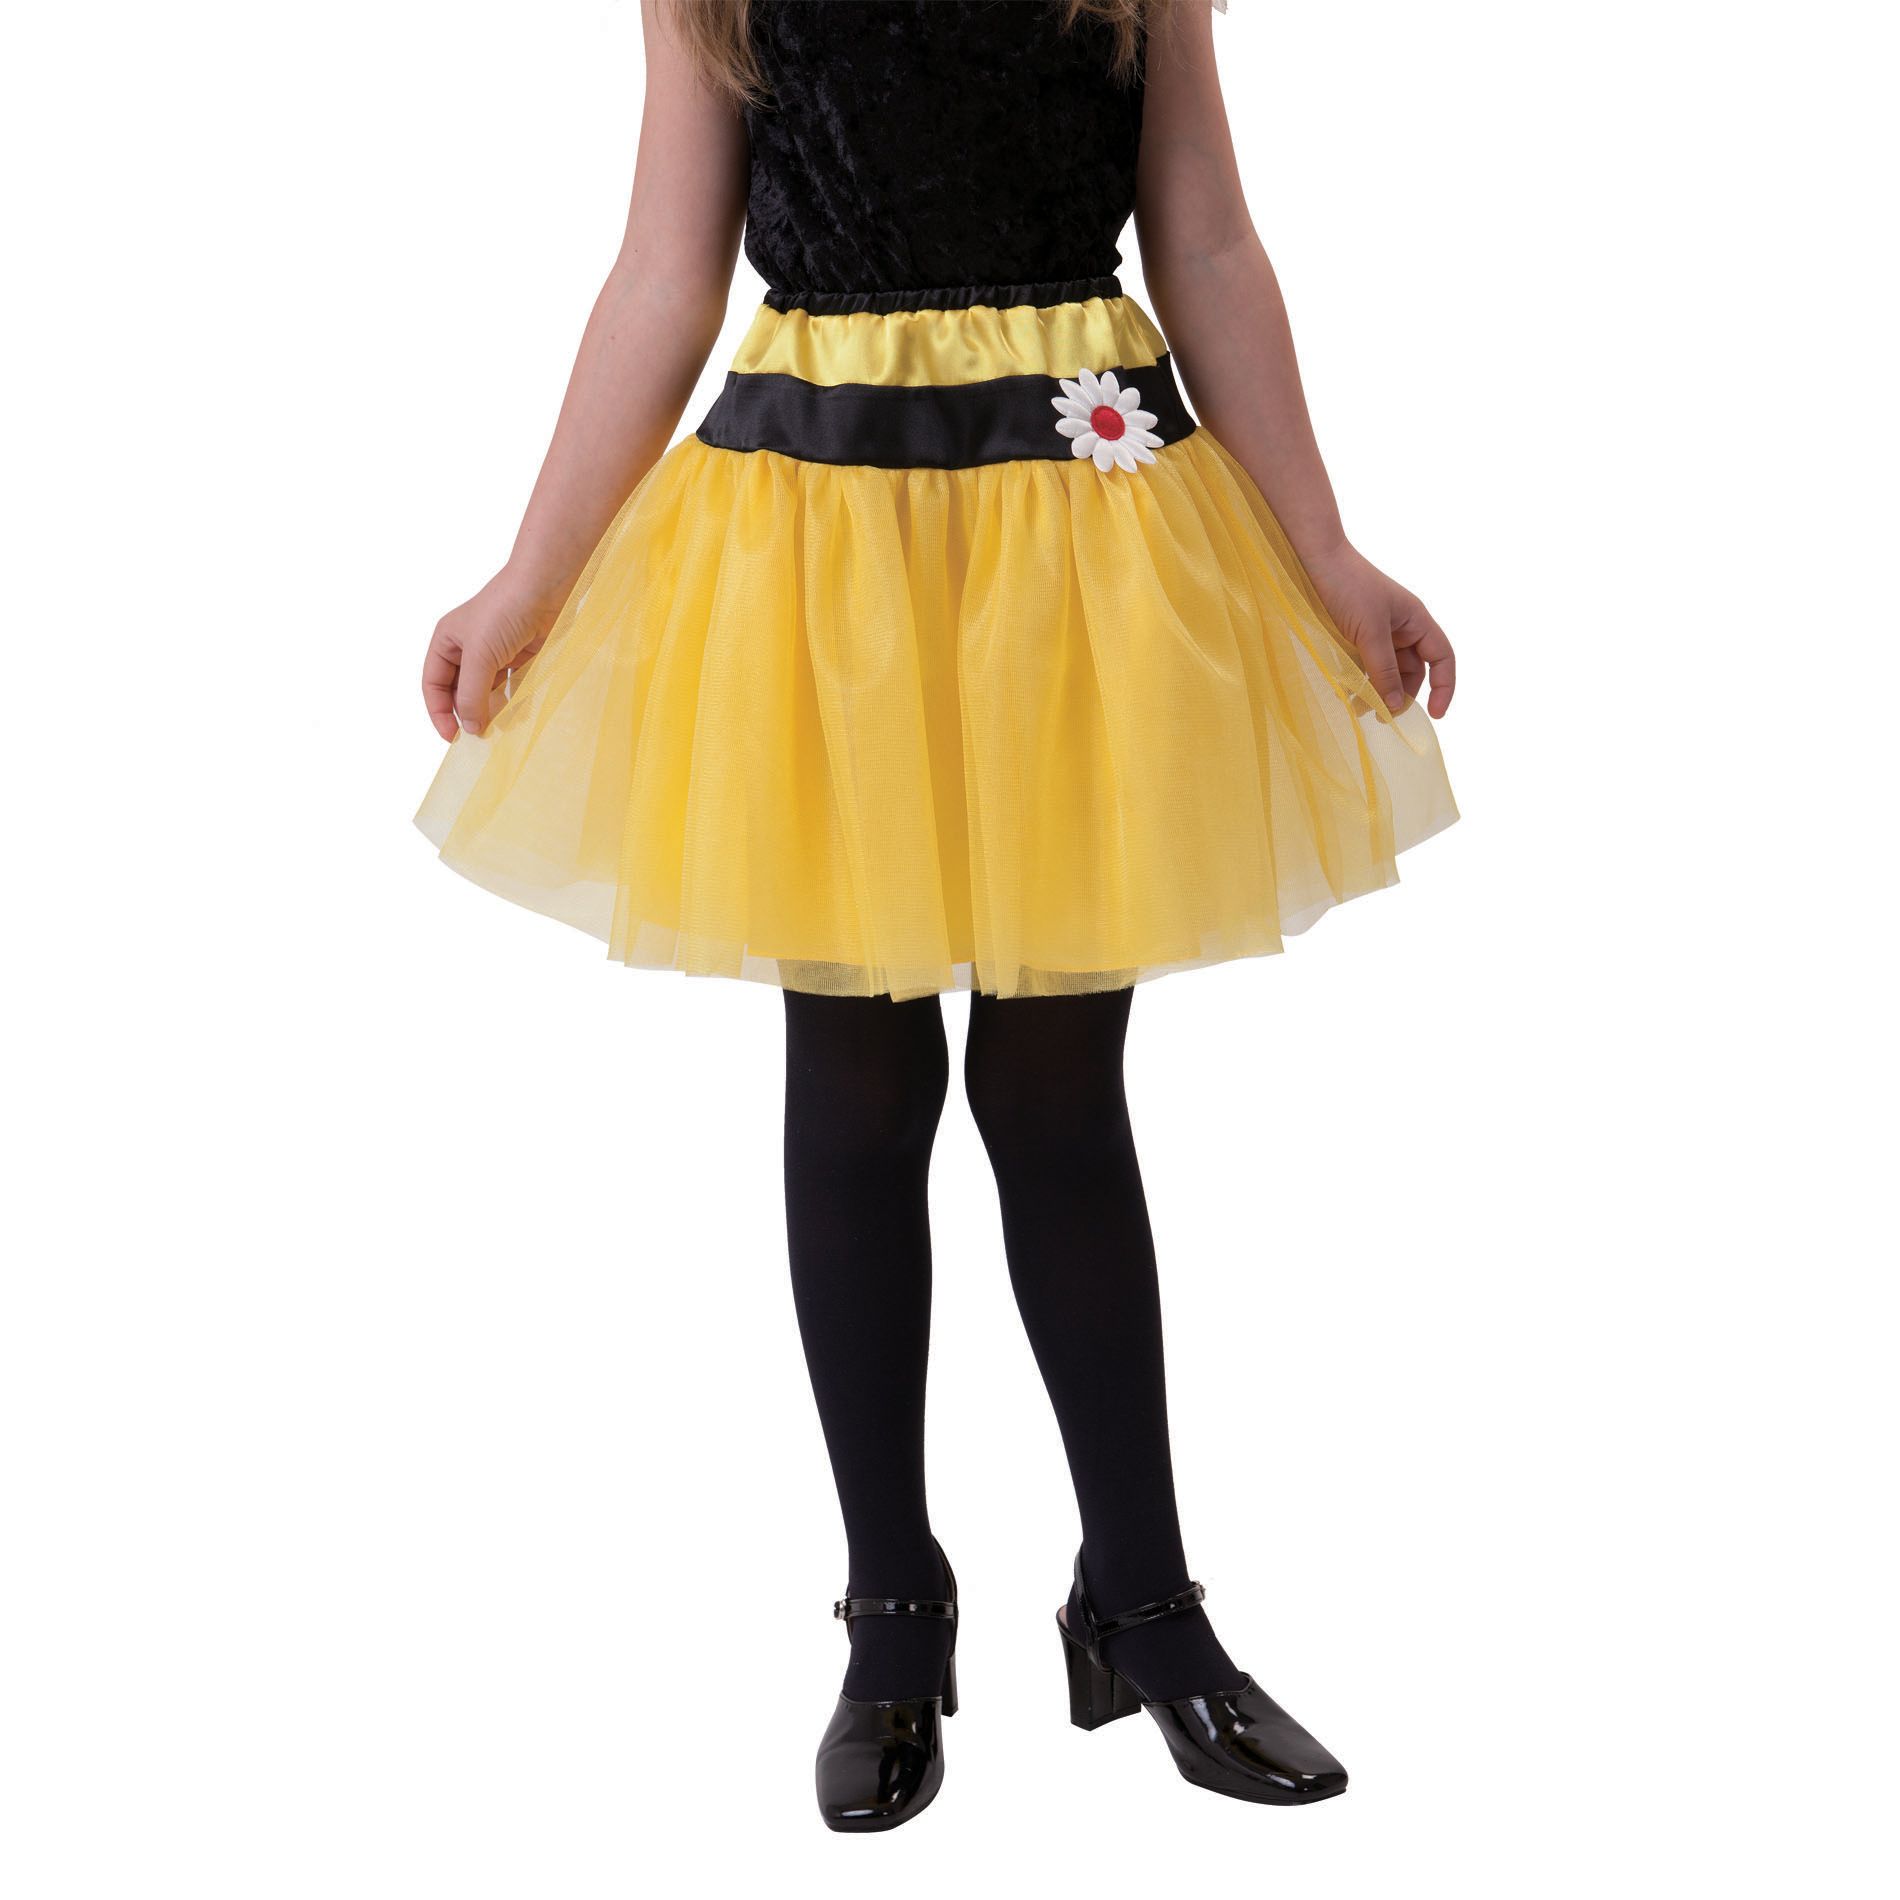 Totally Ghoul Bumble Bee Tutu Skirt